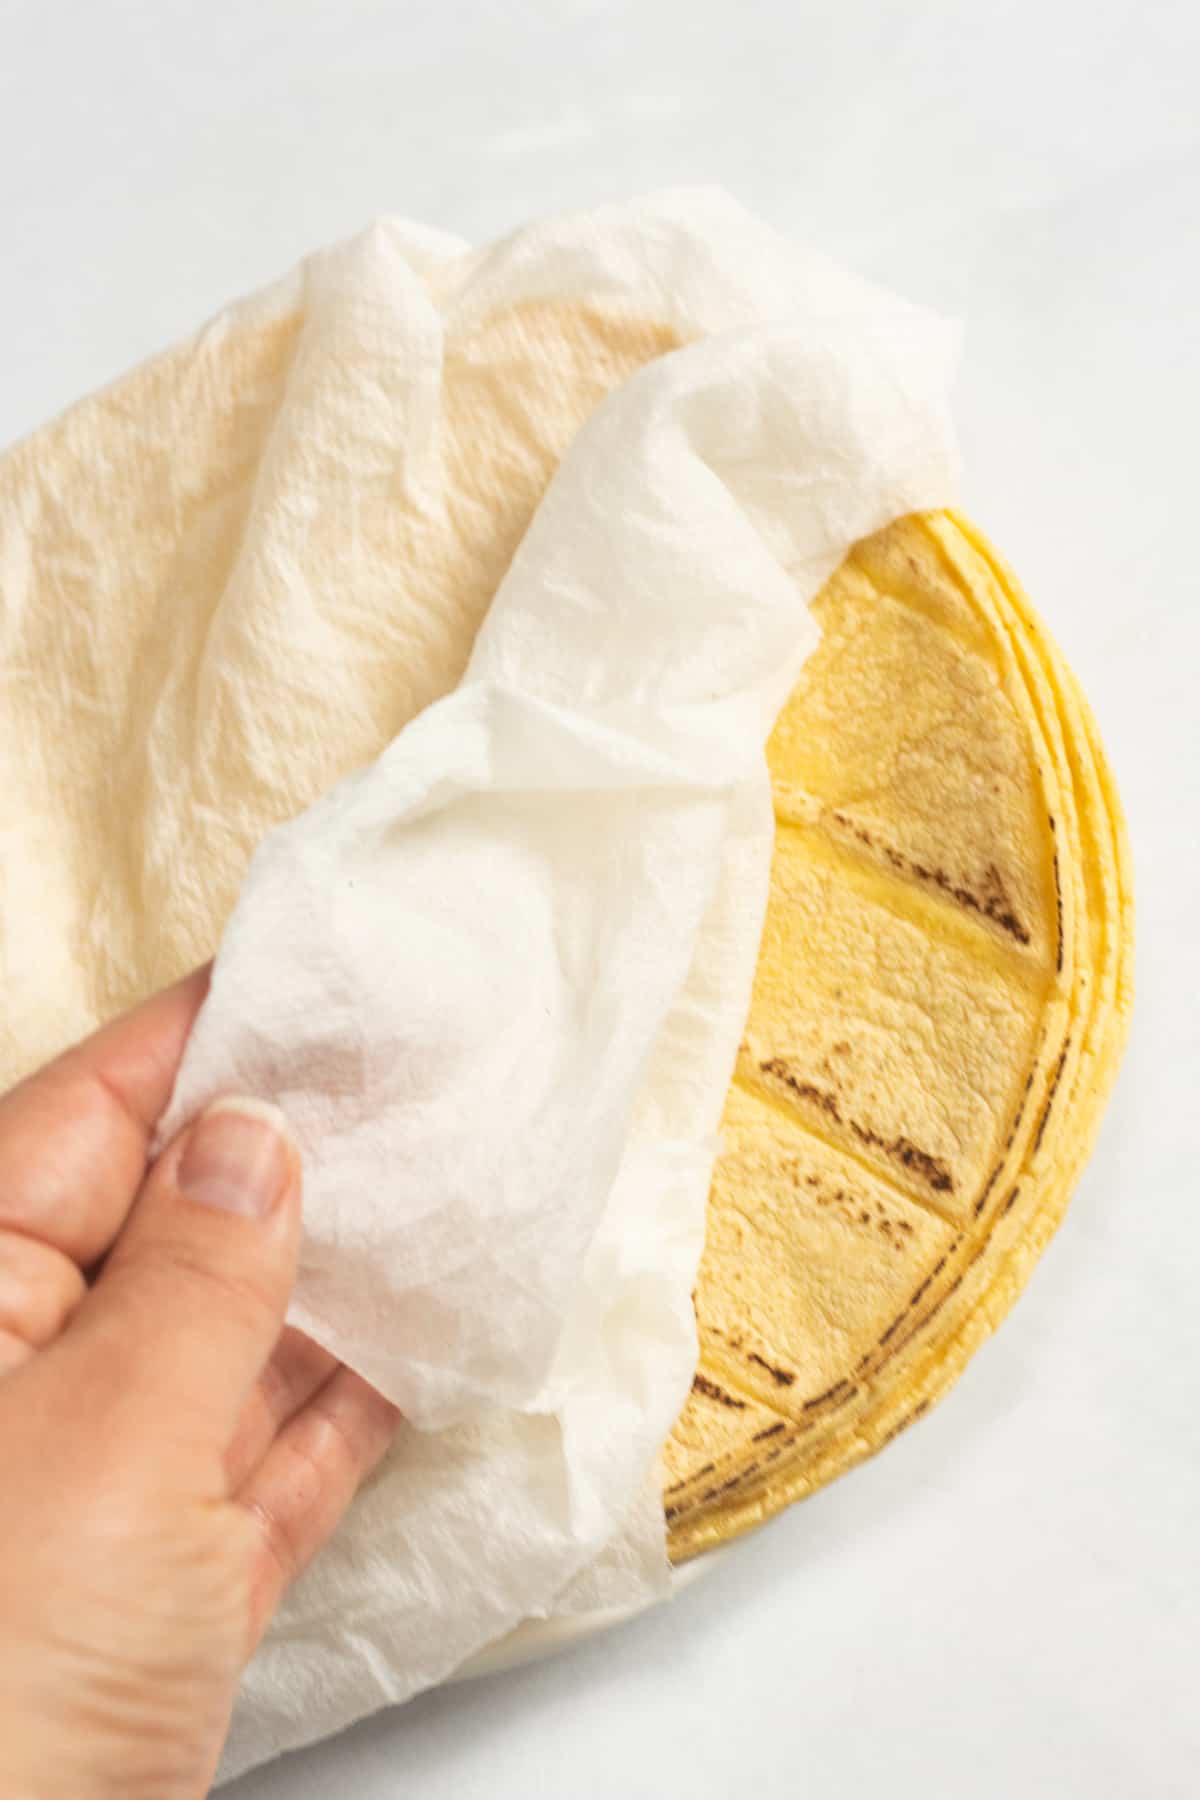 A hand folding a damp paper towel over a stack of corn tortillas.